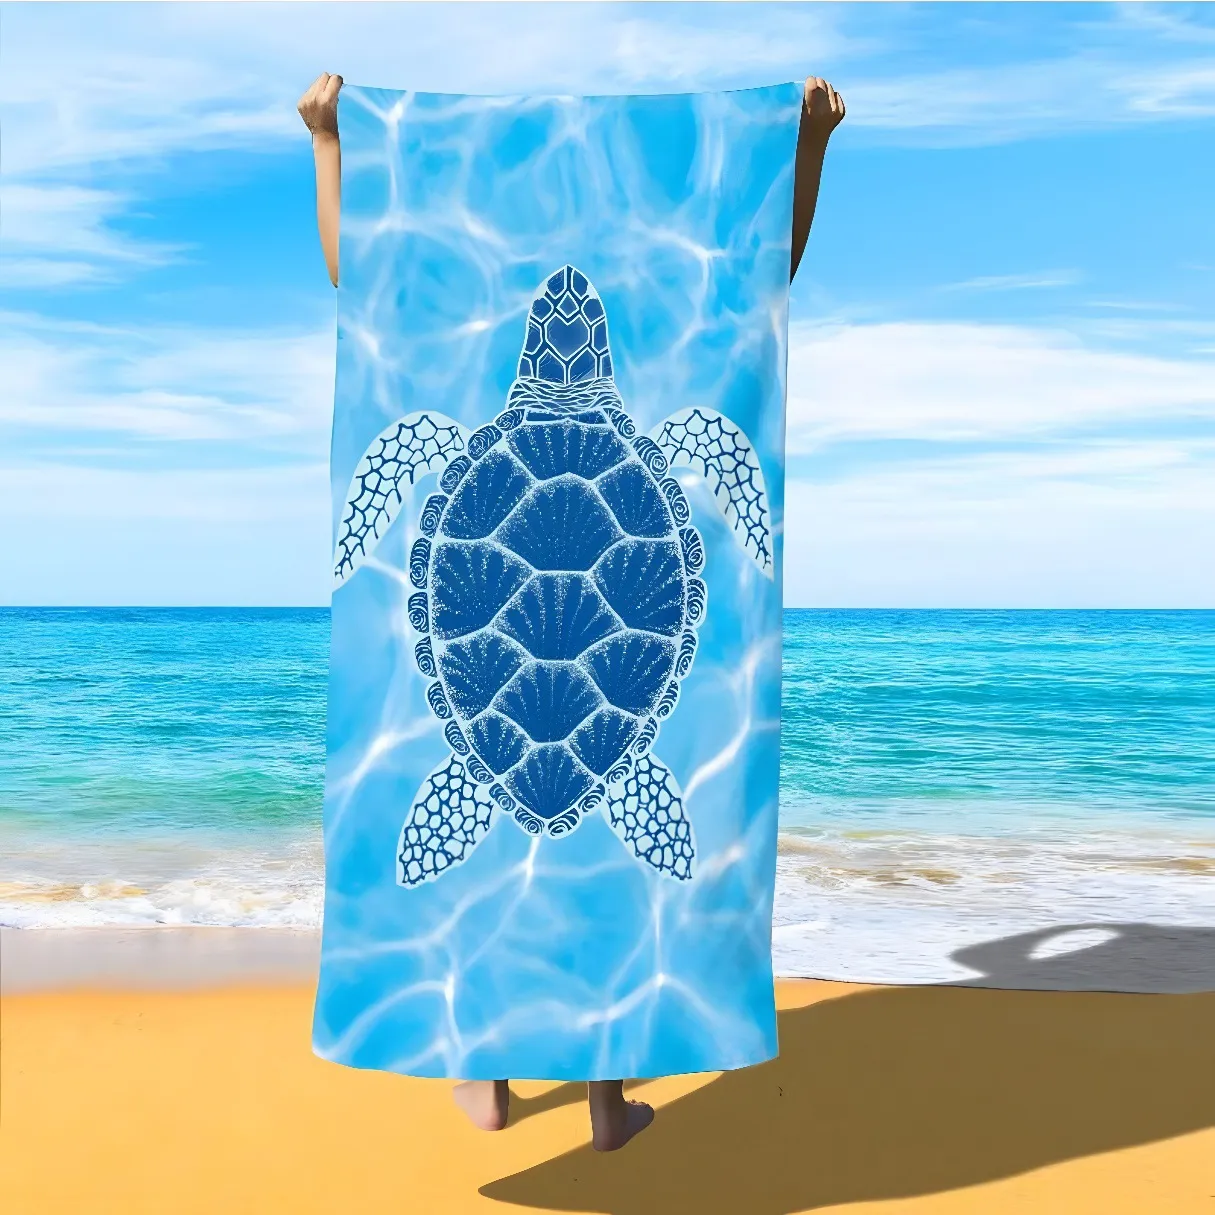 🔥50% OFF TODAY ONLY🔥Microfiber Lightweight Beach Towel Sand Free Quick Dry Absorbent Thin Compact Towels for Swimming Pool Camping Beach Accessories Large Easy Pack Travel Things for Vacation Essentials Gift